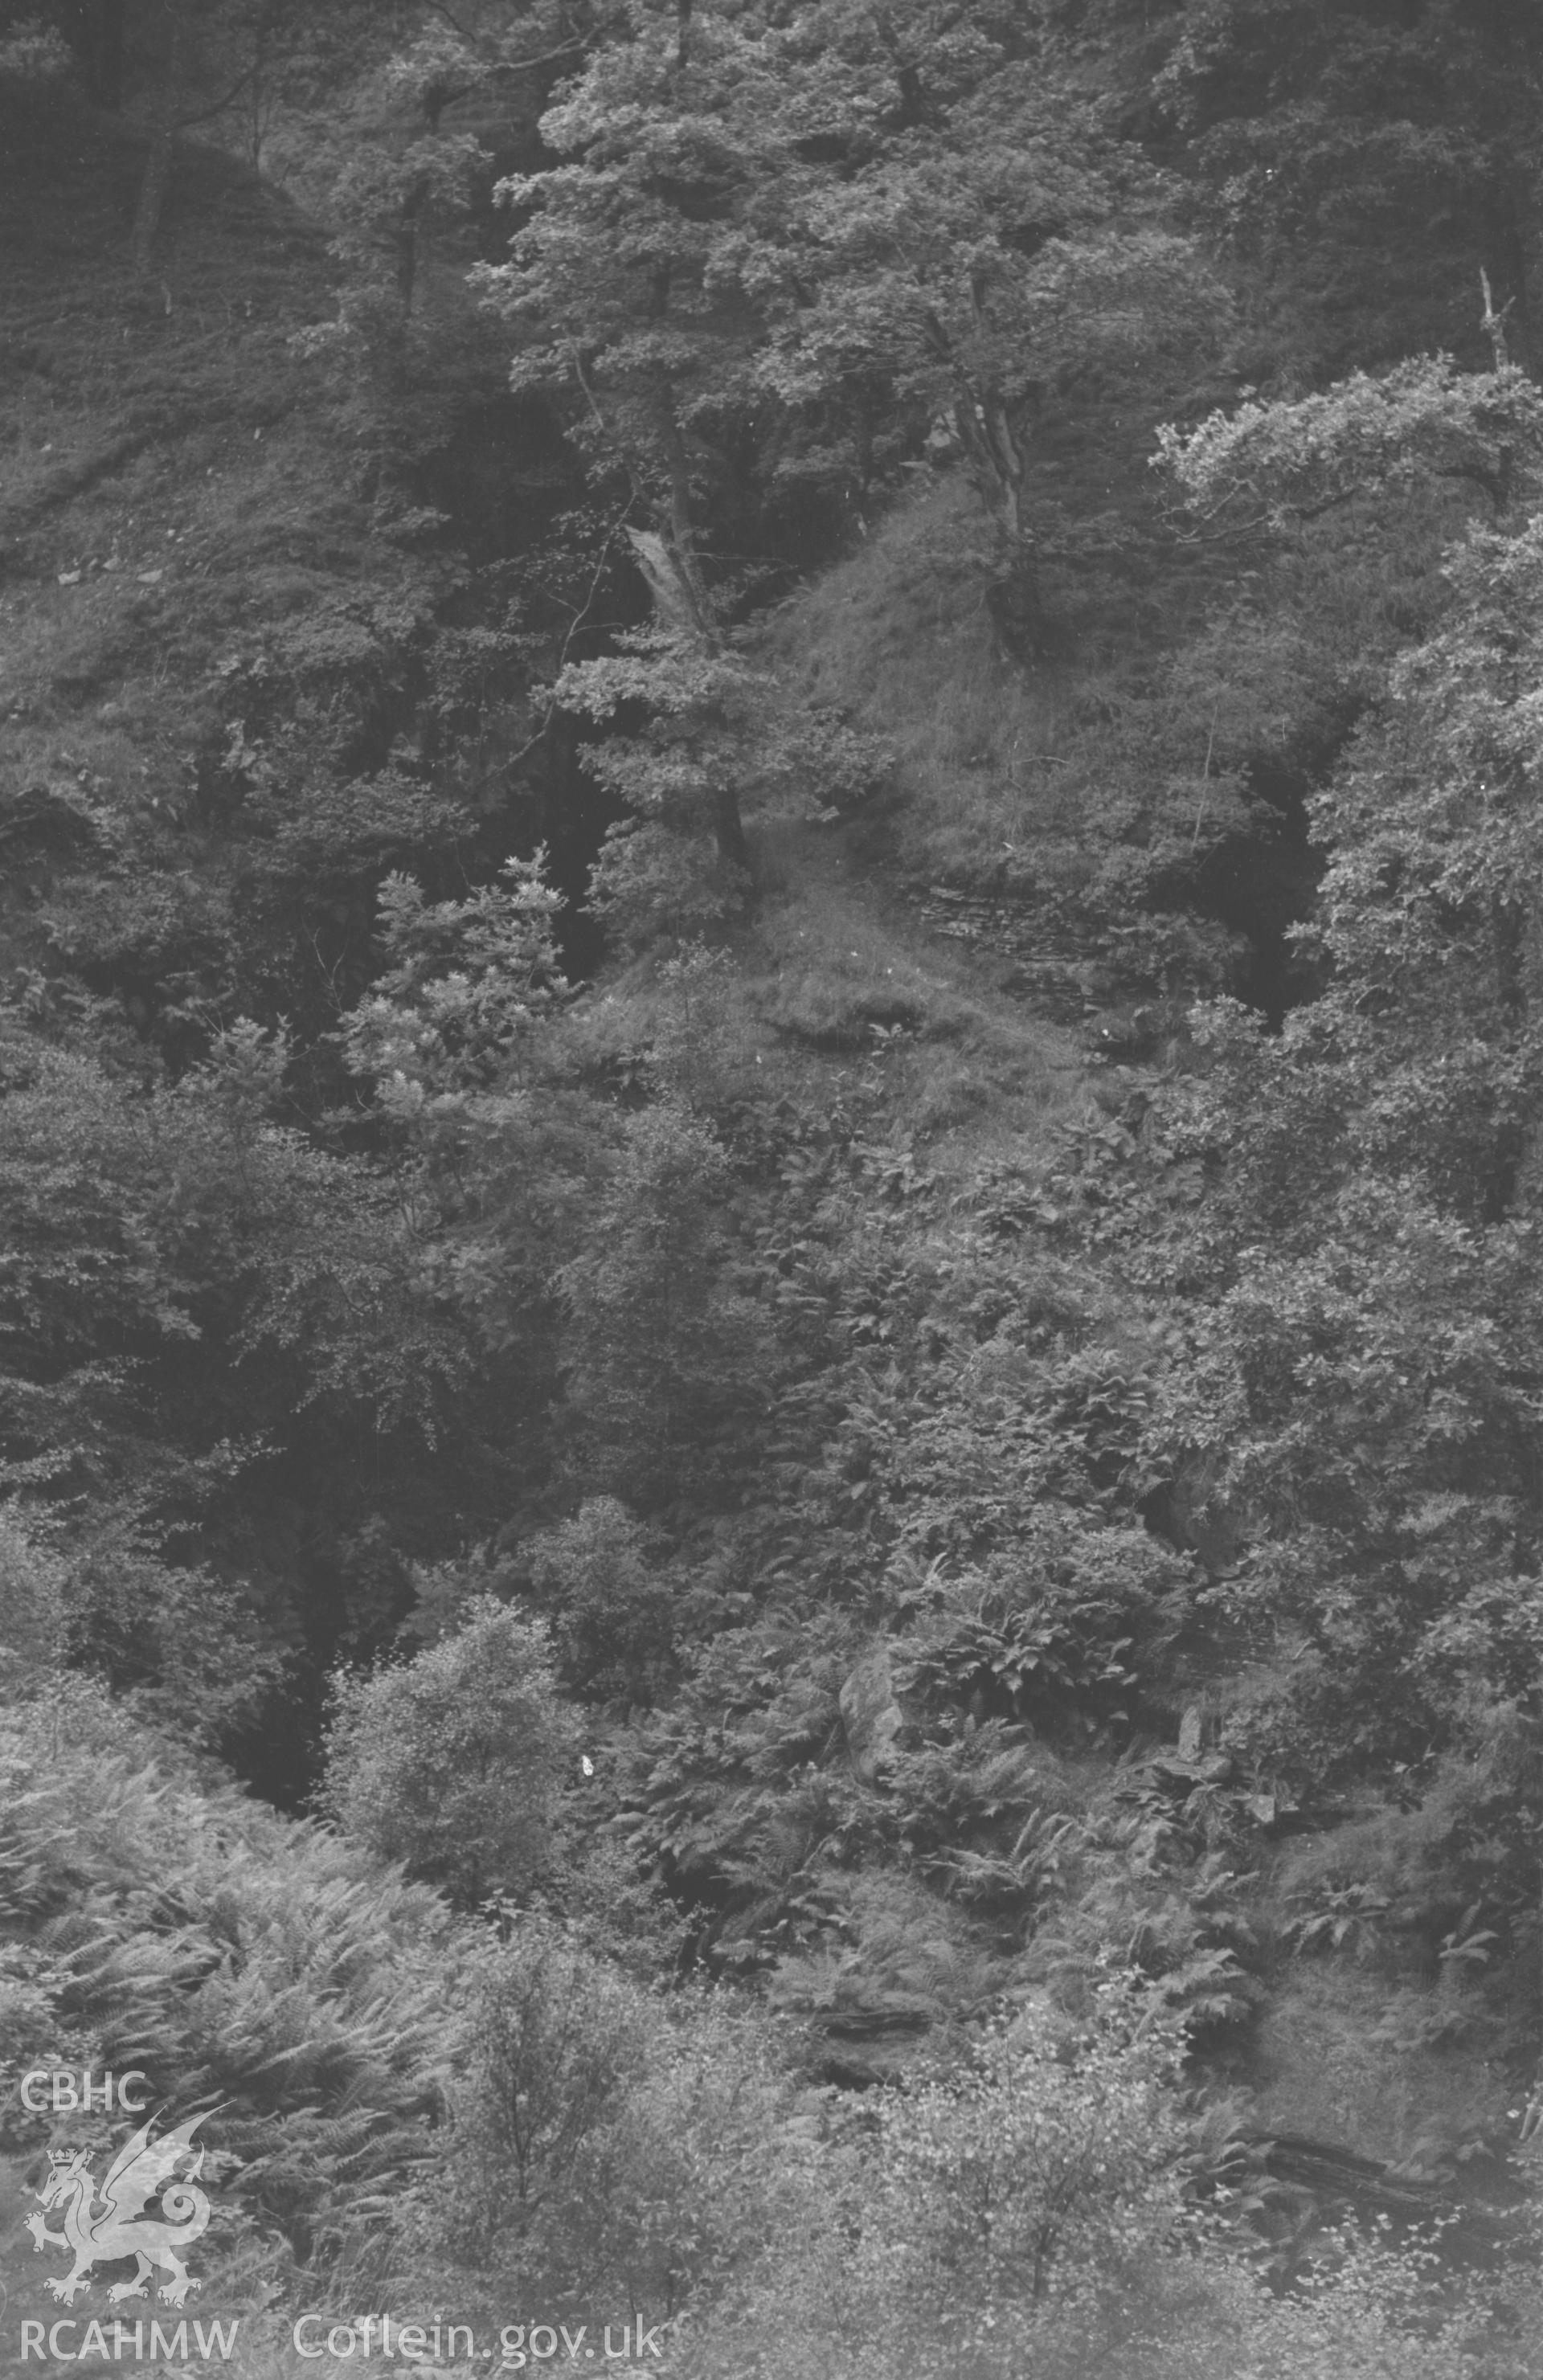 Digital copy of black & white negative showing Caerwern Waterfall (left) on Nant Gau, with Robber's Cave entrance (on right, just above centre). Photograph by Arthur O. Chater, September 1964 from Grid Ref SN 7752 7274, looking west south west.